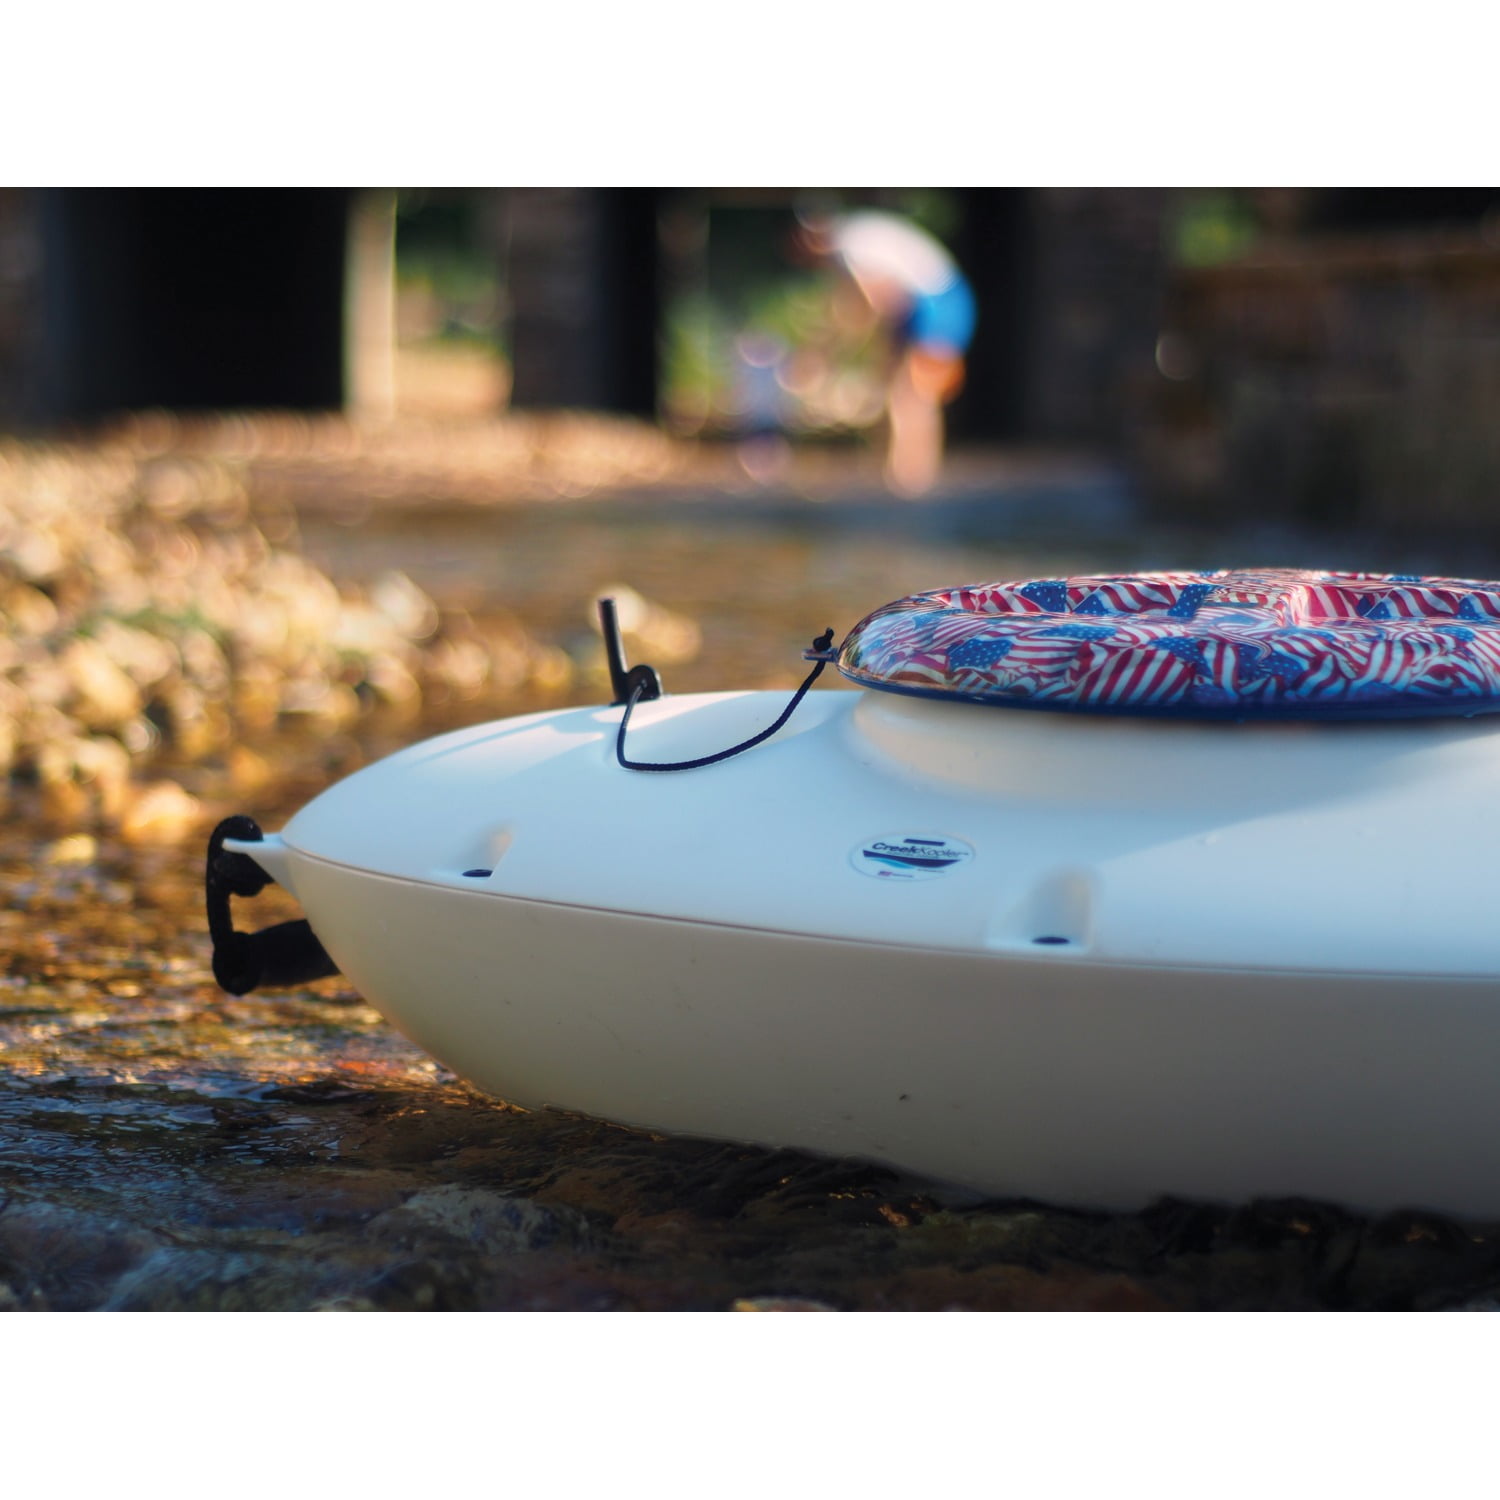 CreekKooler 30 qt. Floating Insulated Beverage Kayak White Cooler with 8  ft. Rope CK0022 + TS01601 - The Home Depot